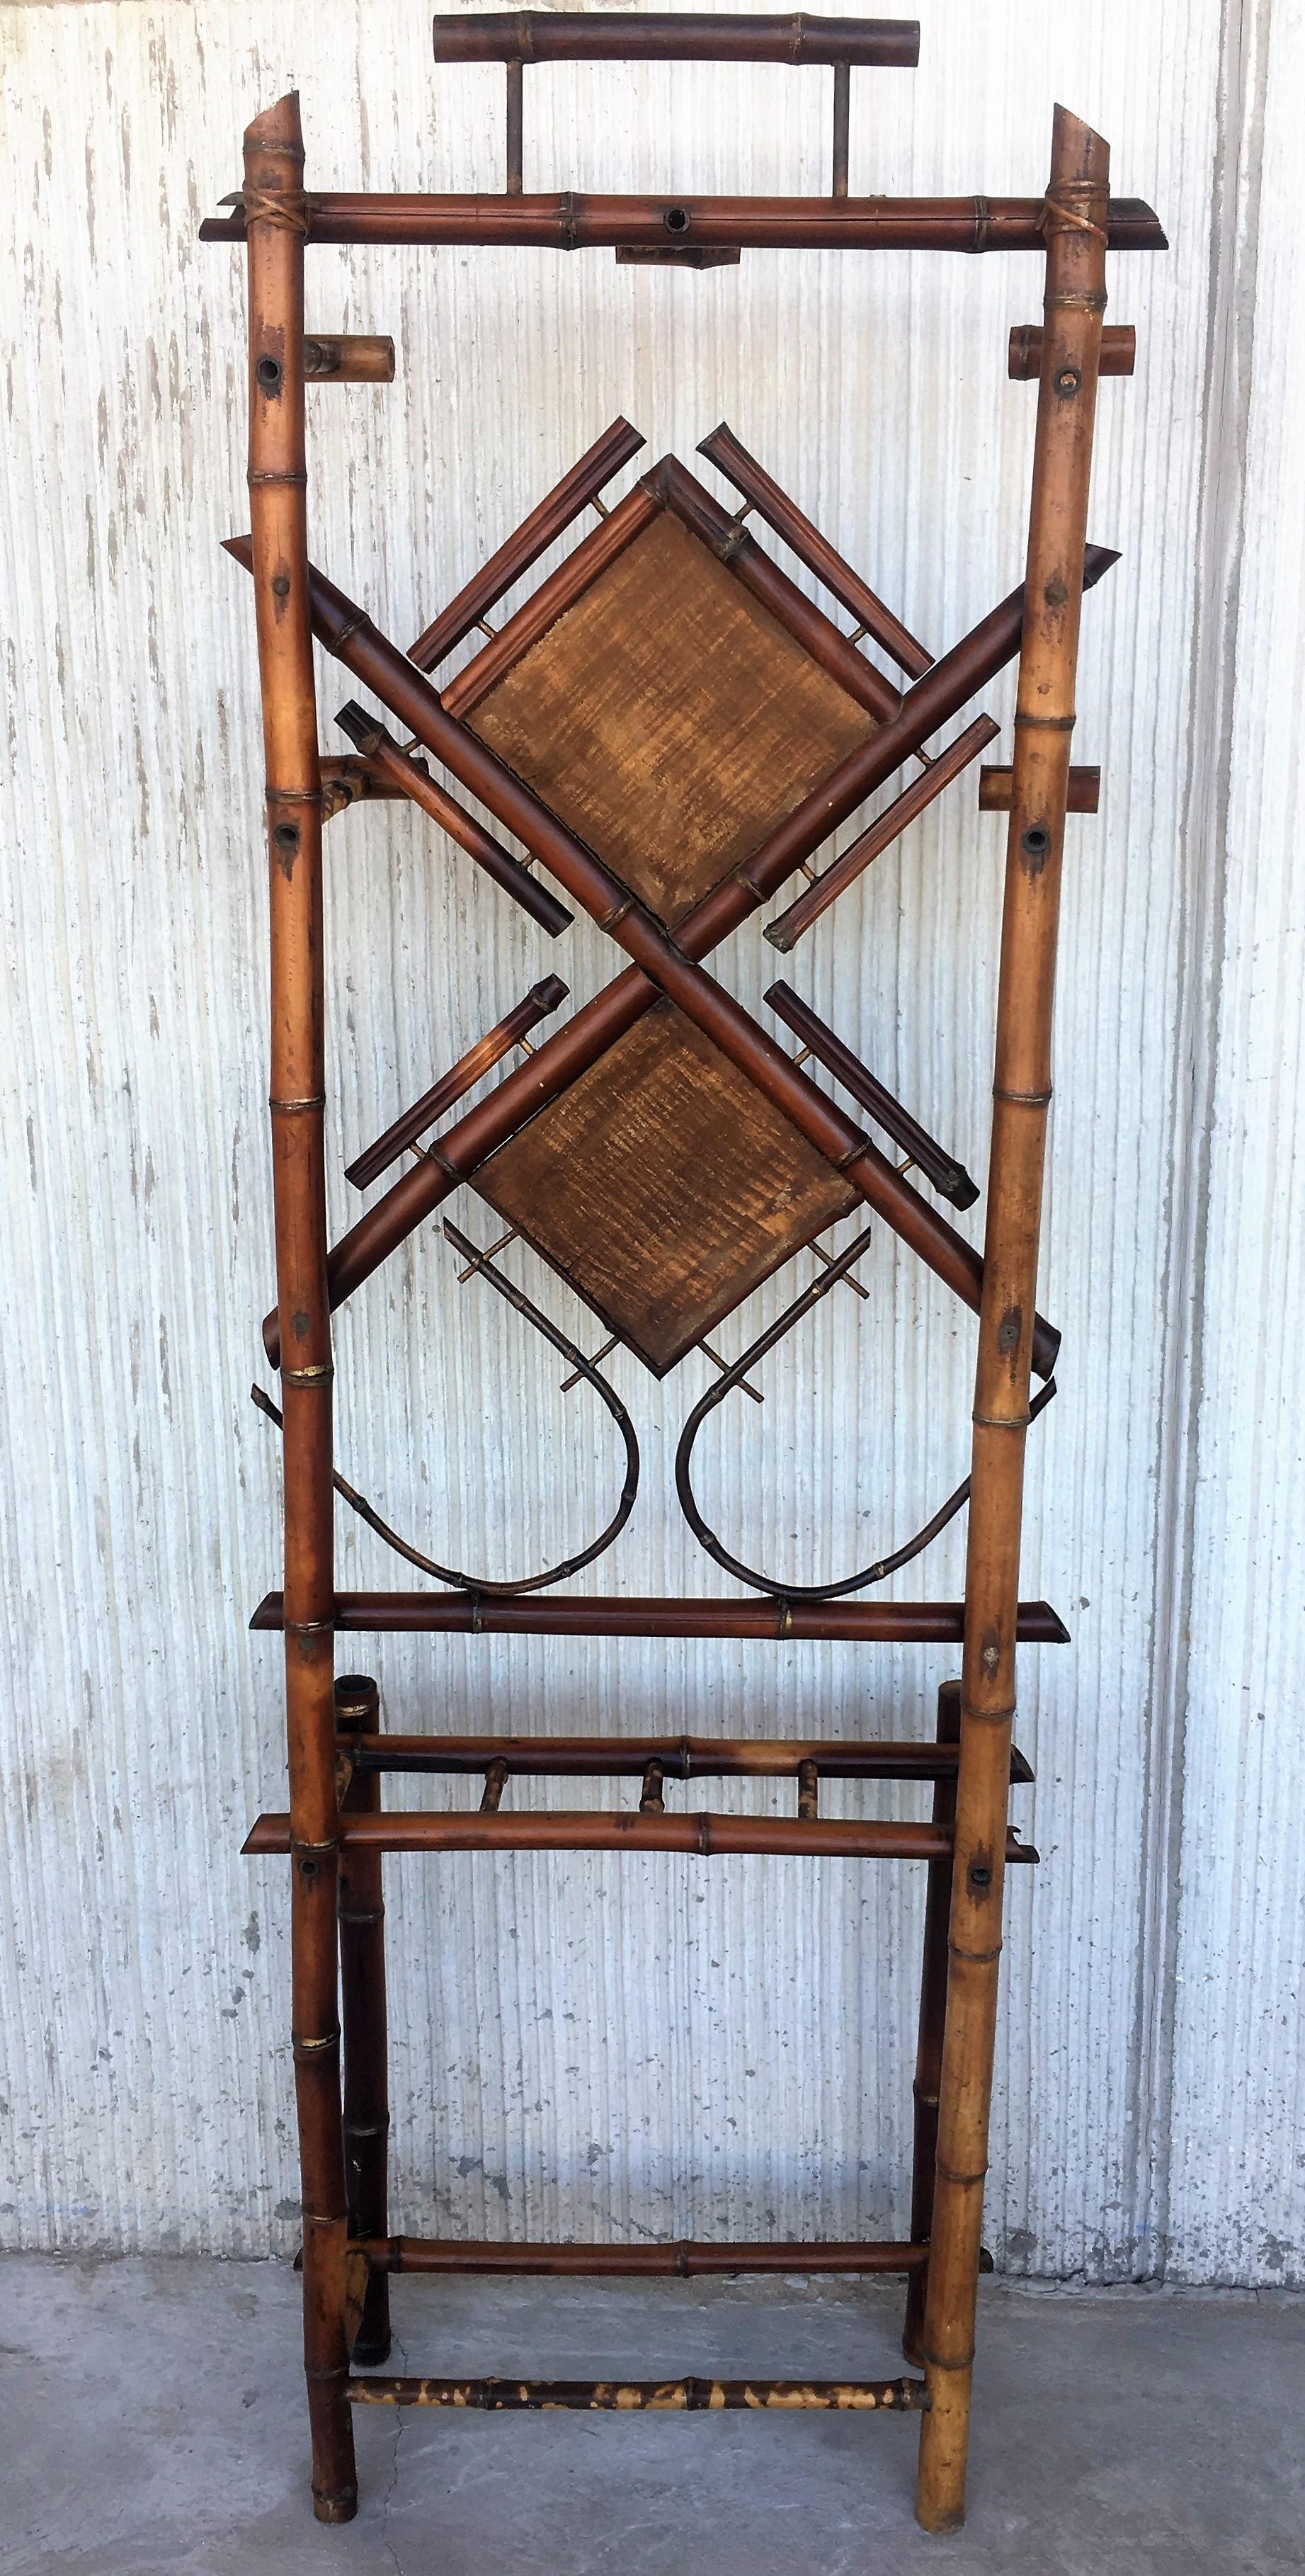 Antique tiger bamboo hall tree with handwoven rice mat and double decorative square/diamond center pieces. The hall tree features four slots for storing umbrellas and a vanity mirror and five hooks for coats.

Refinished to new for you.